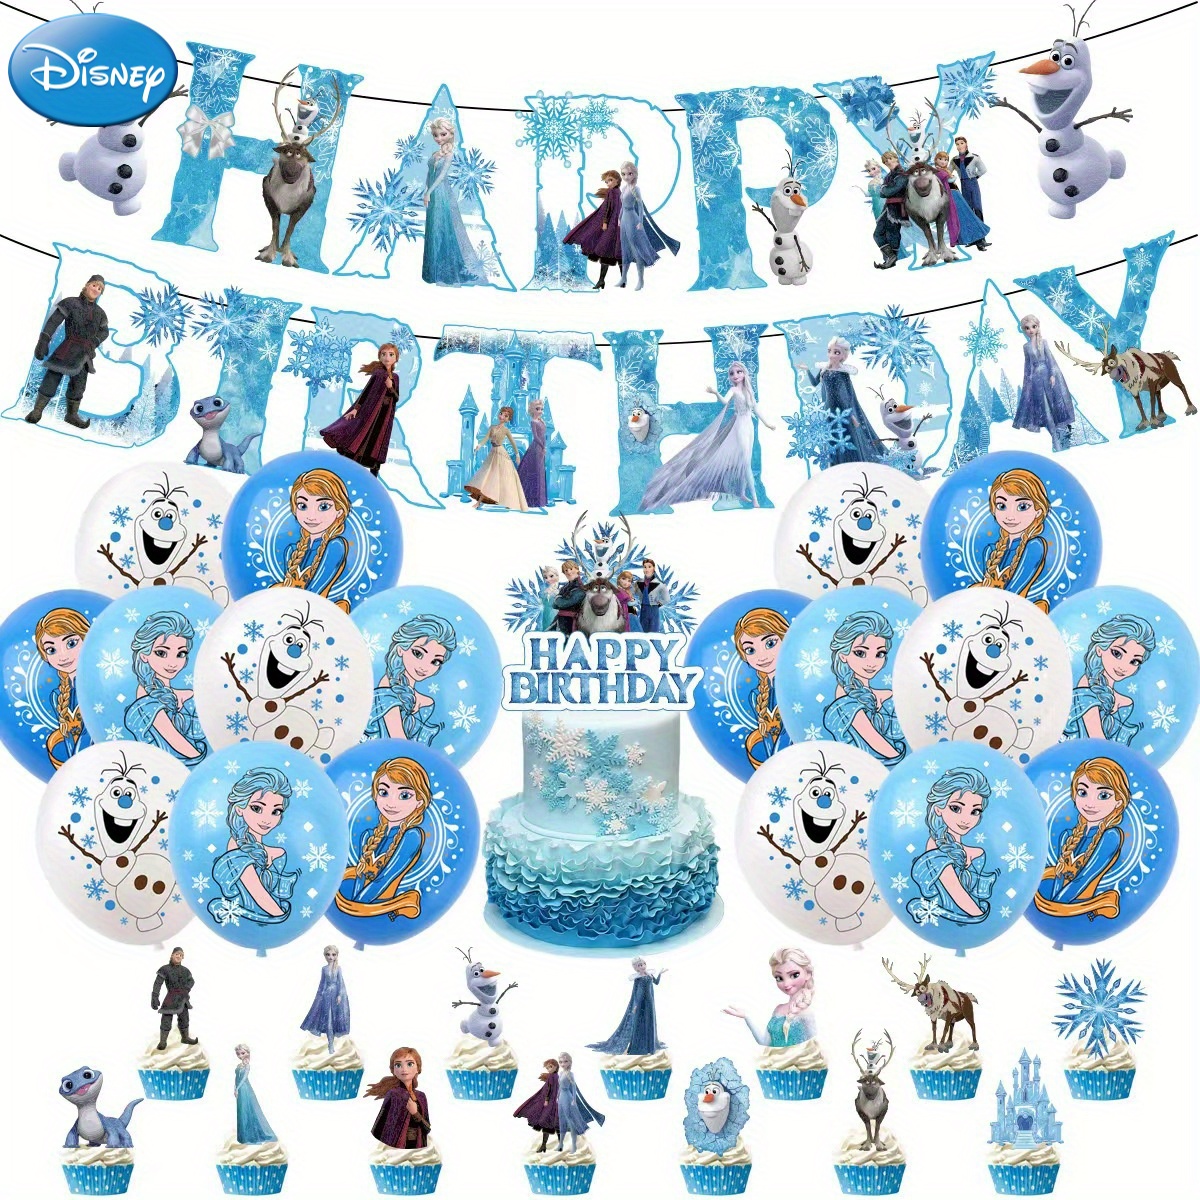 

Disney Princess & Anna Birthday Party Decorations - Includes Balloons, Banner, And Cake Toppers For Ages 14+ | Ume Authorized